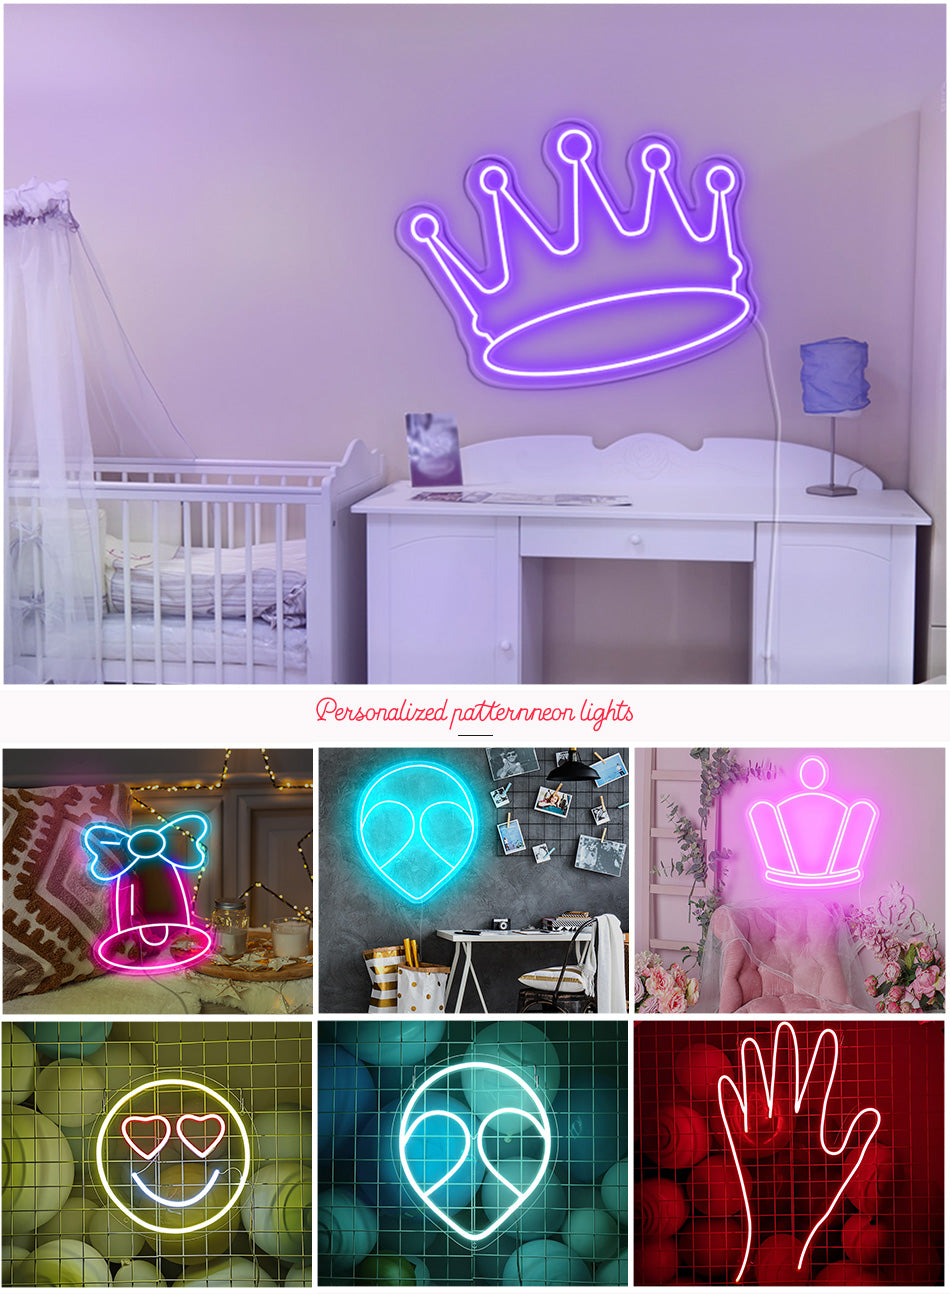 Crown neon sign